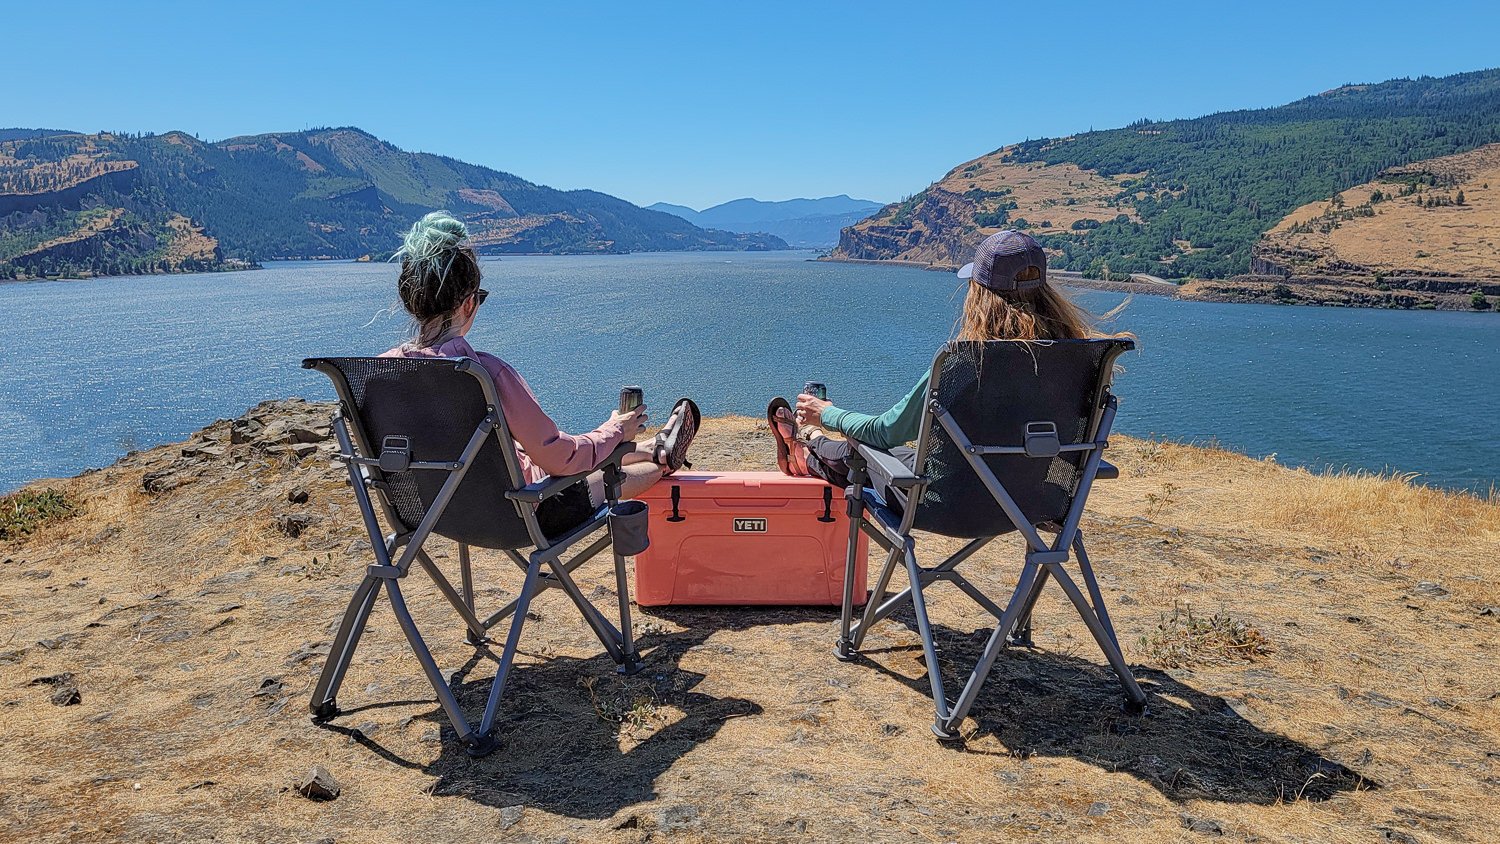 Two women sitting in the YETI Trailhead Chairs with their feet up on the YETI Tundra Cooler